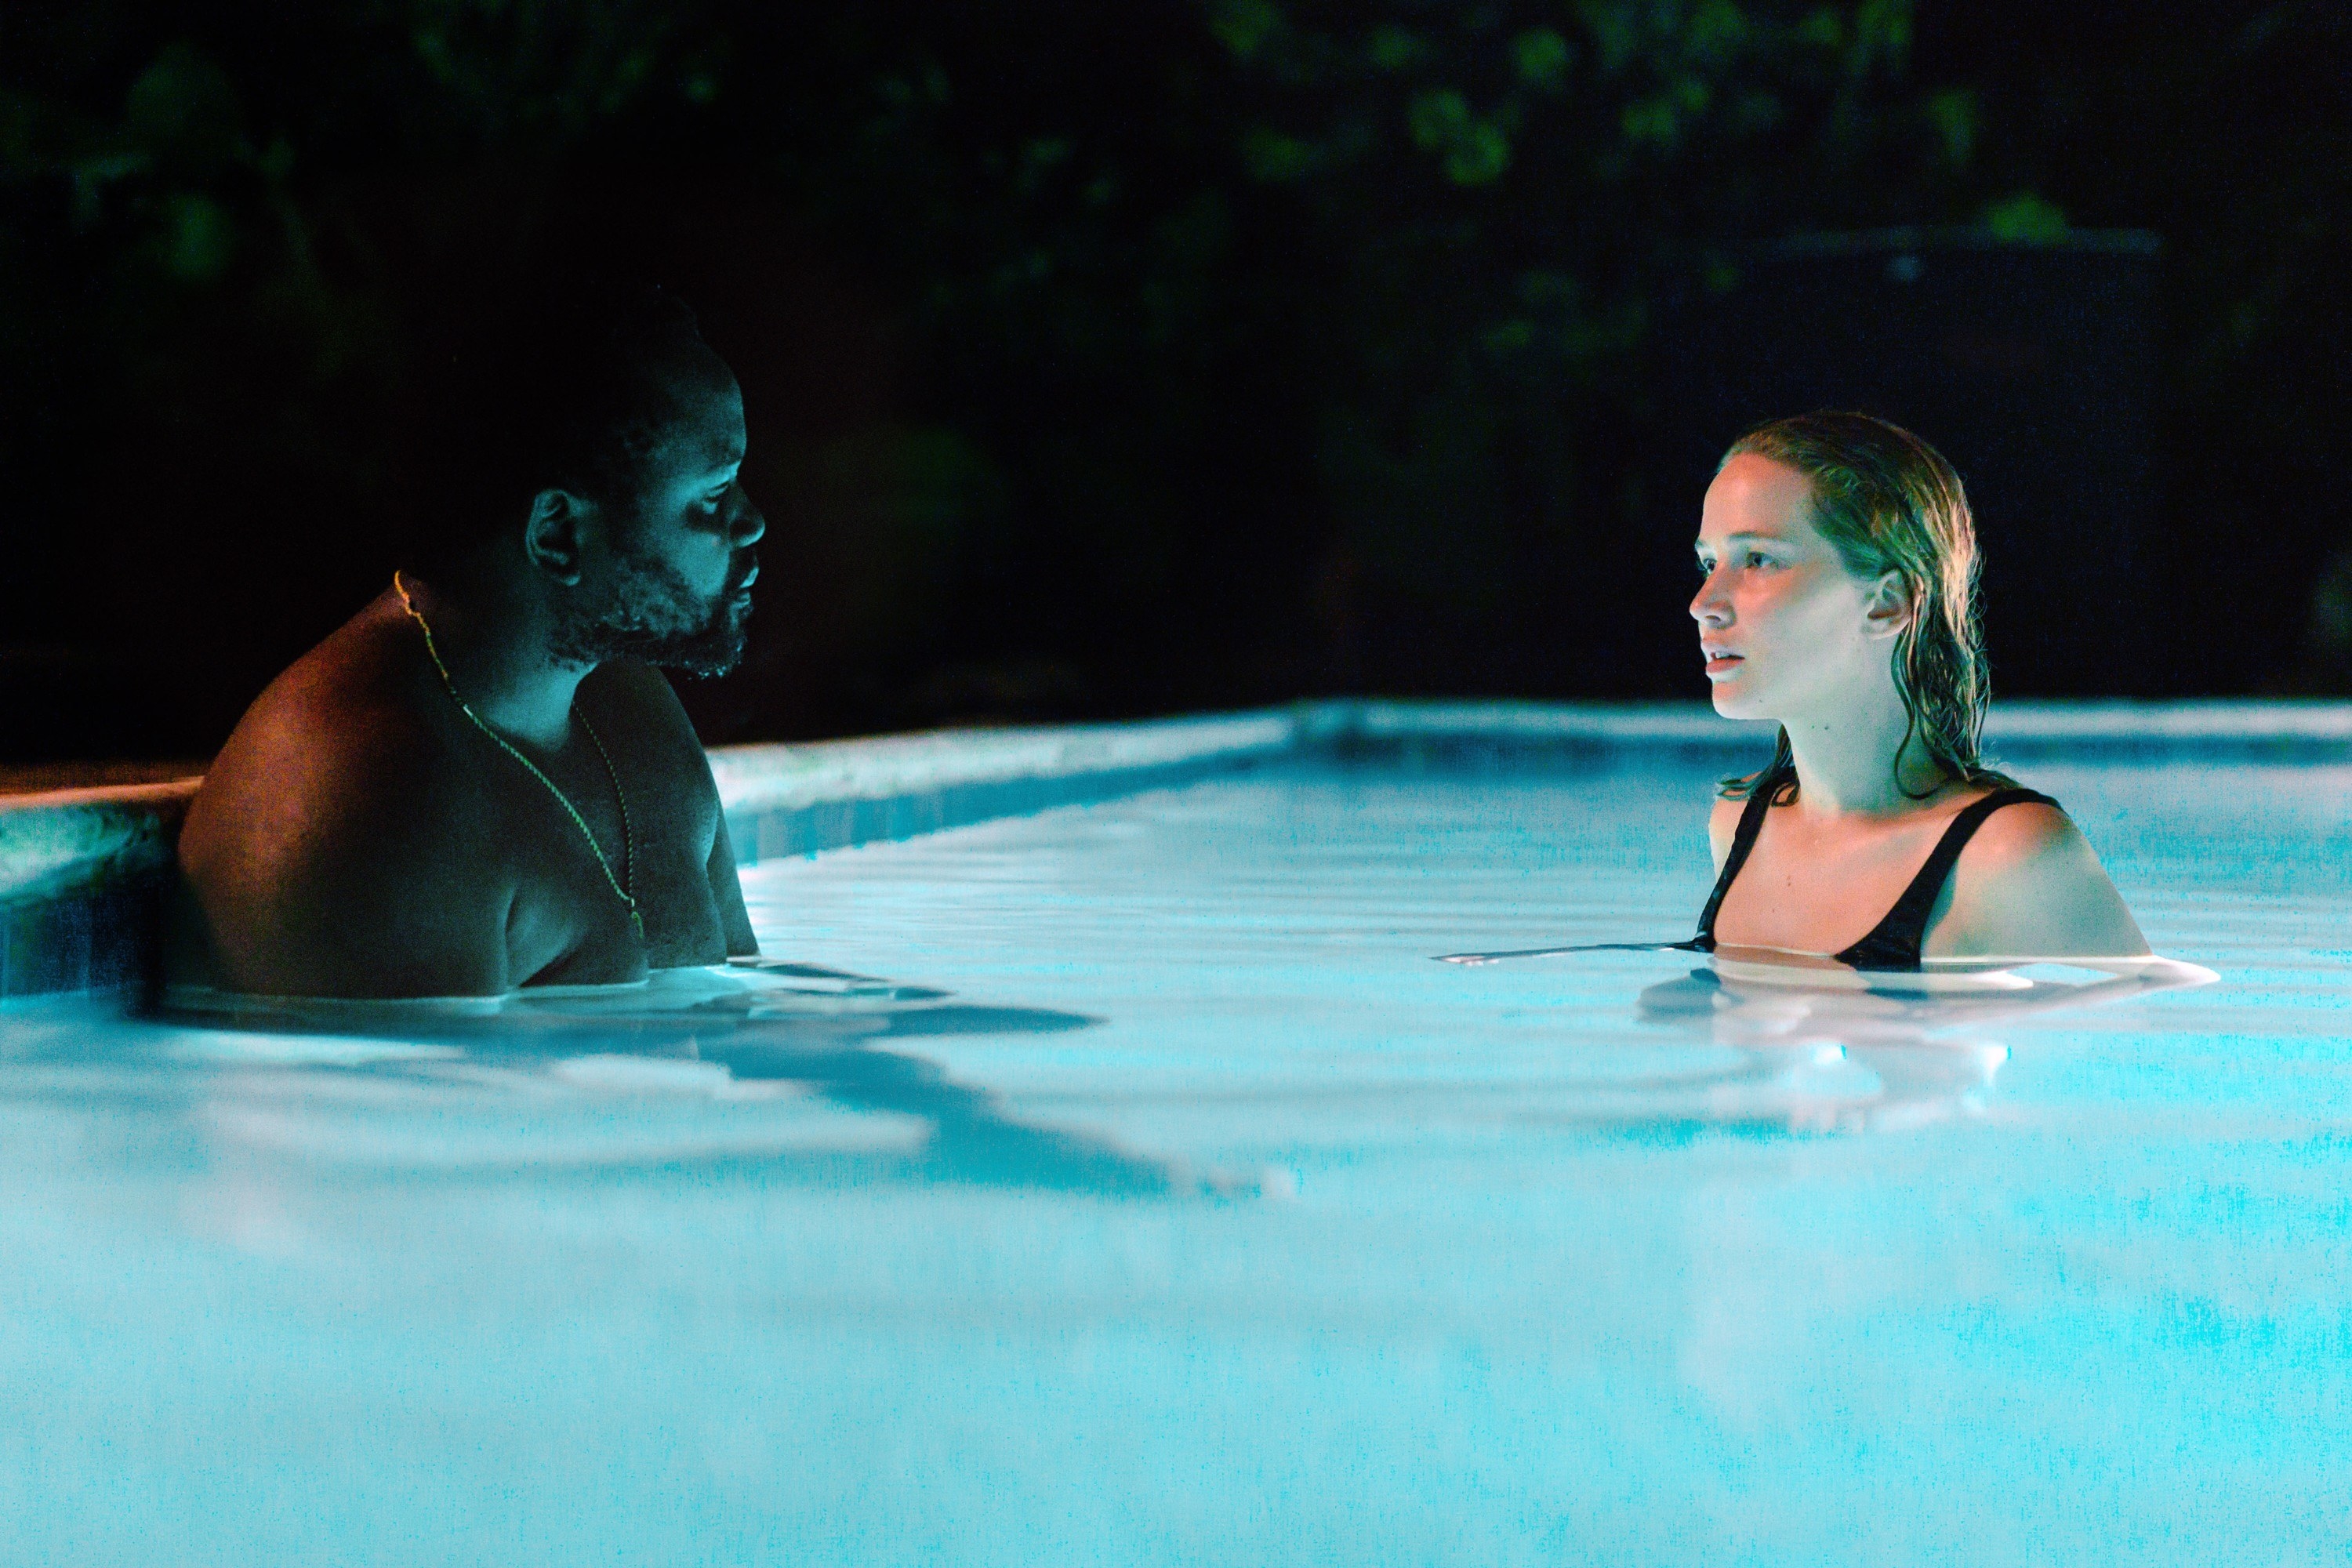 Brian Tyree Henry and Jennifer Lawrence talk in a swimming pool